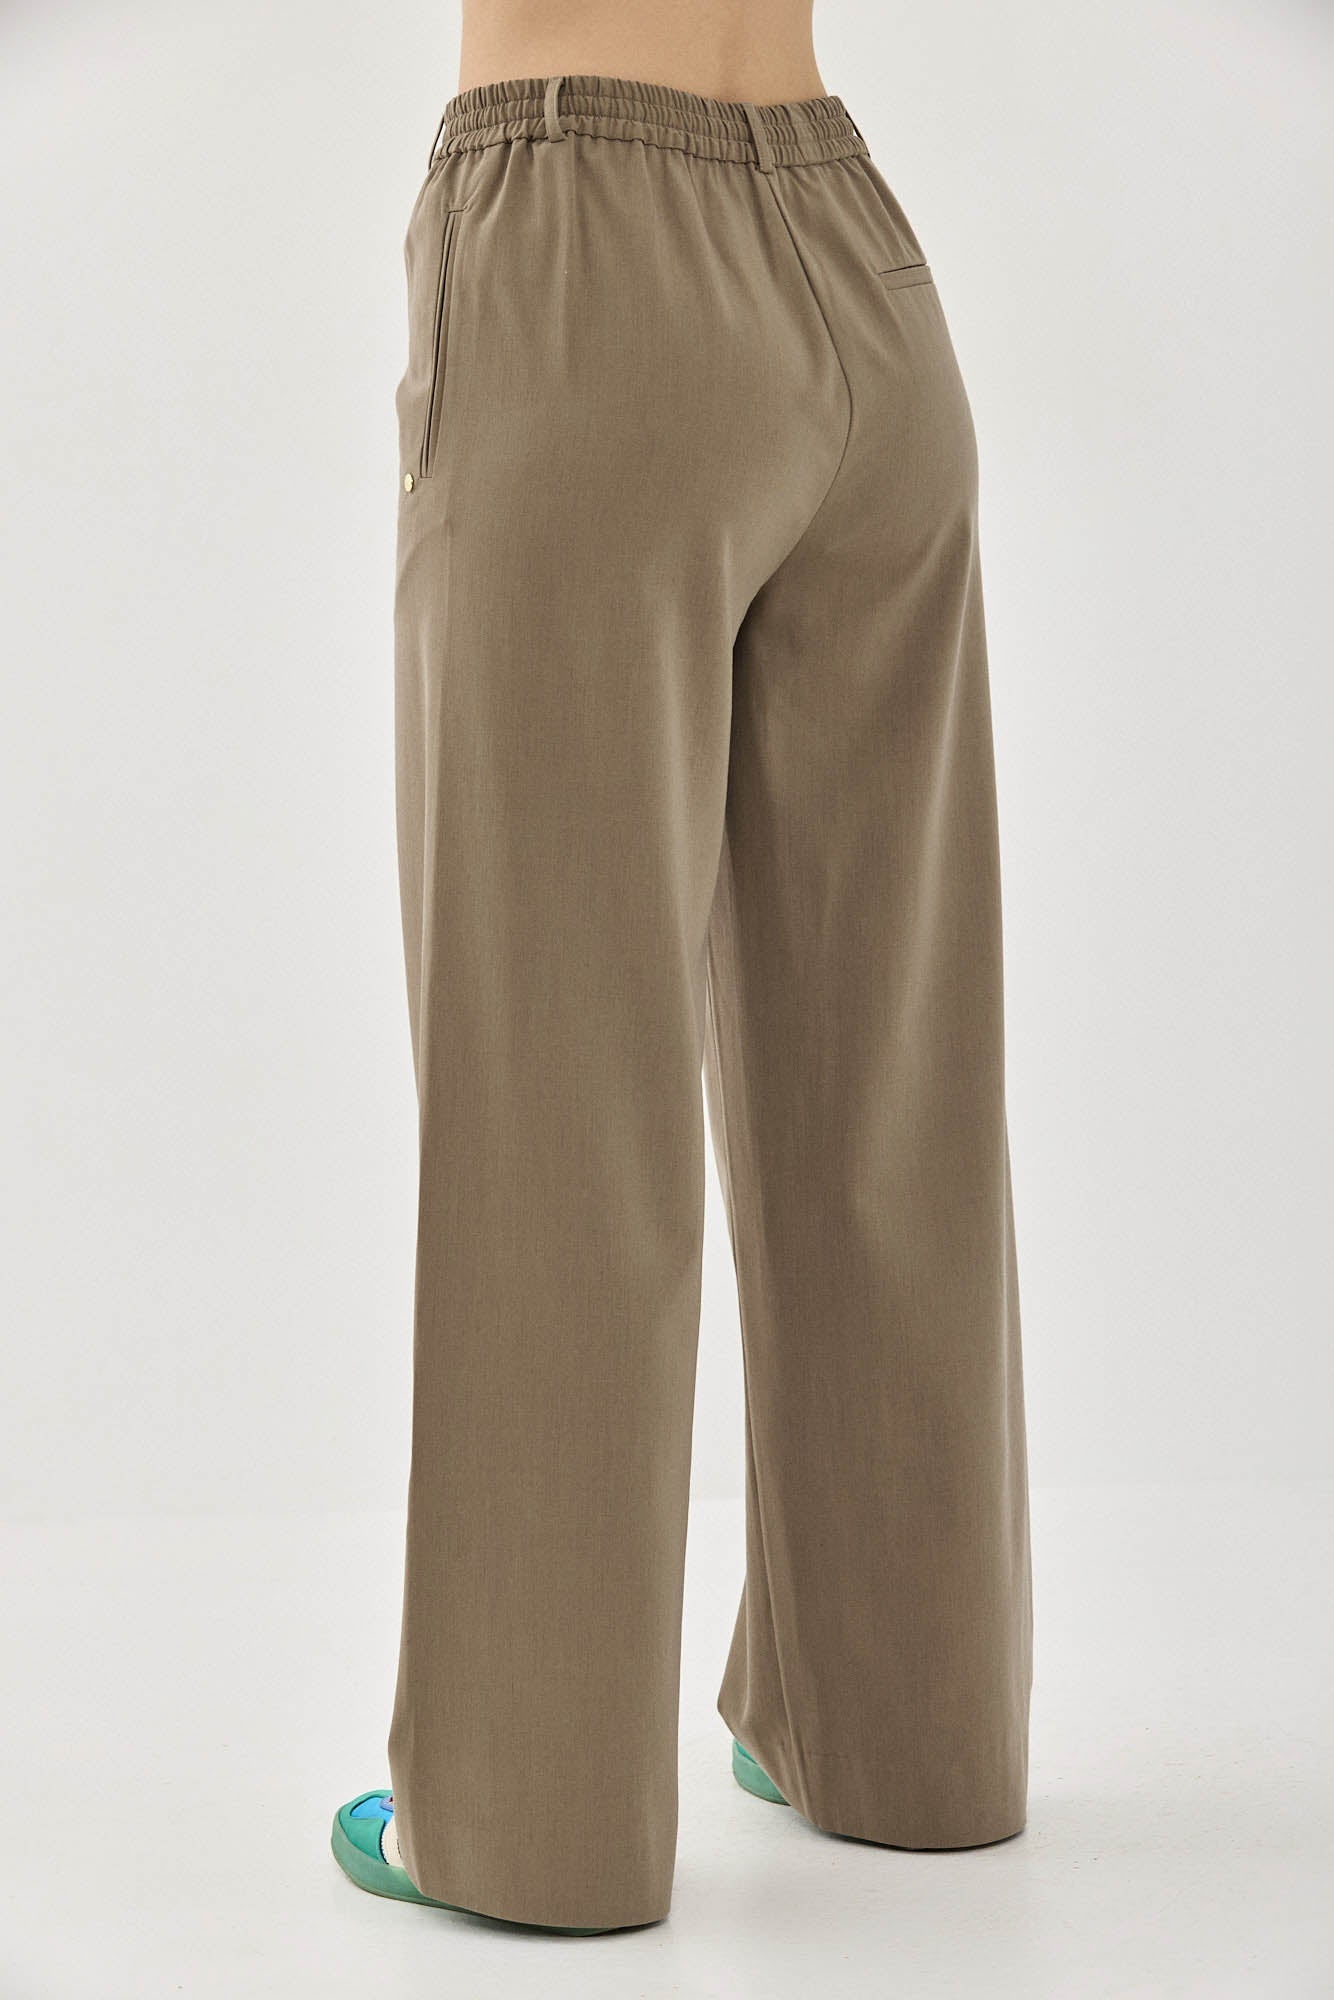 CHEN PANTS TAUPE GRAY